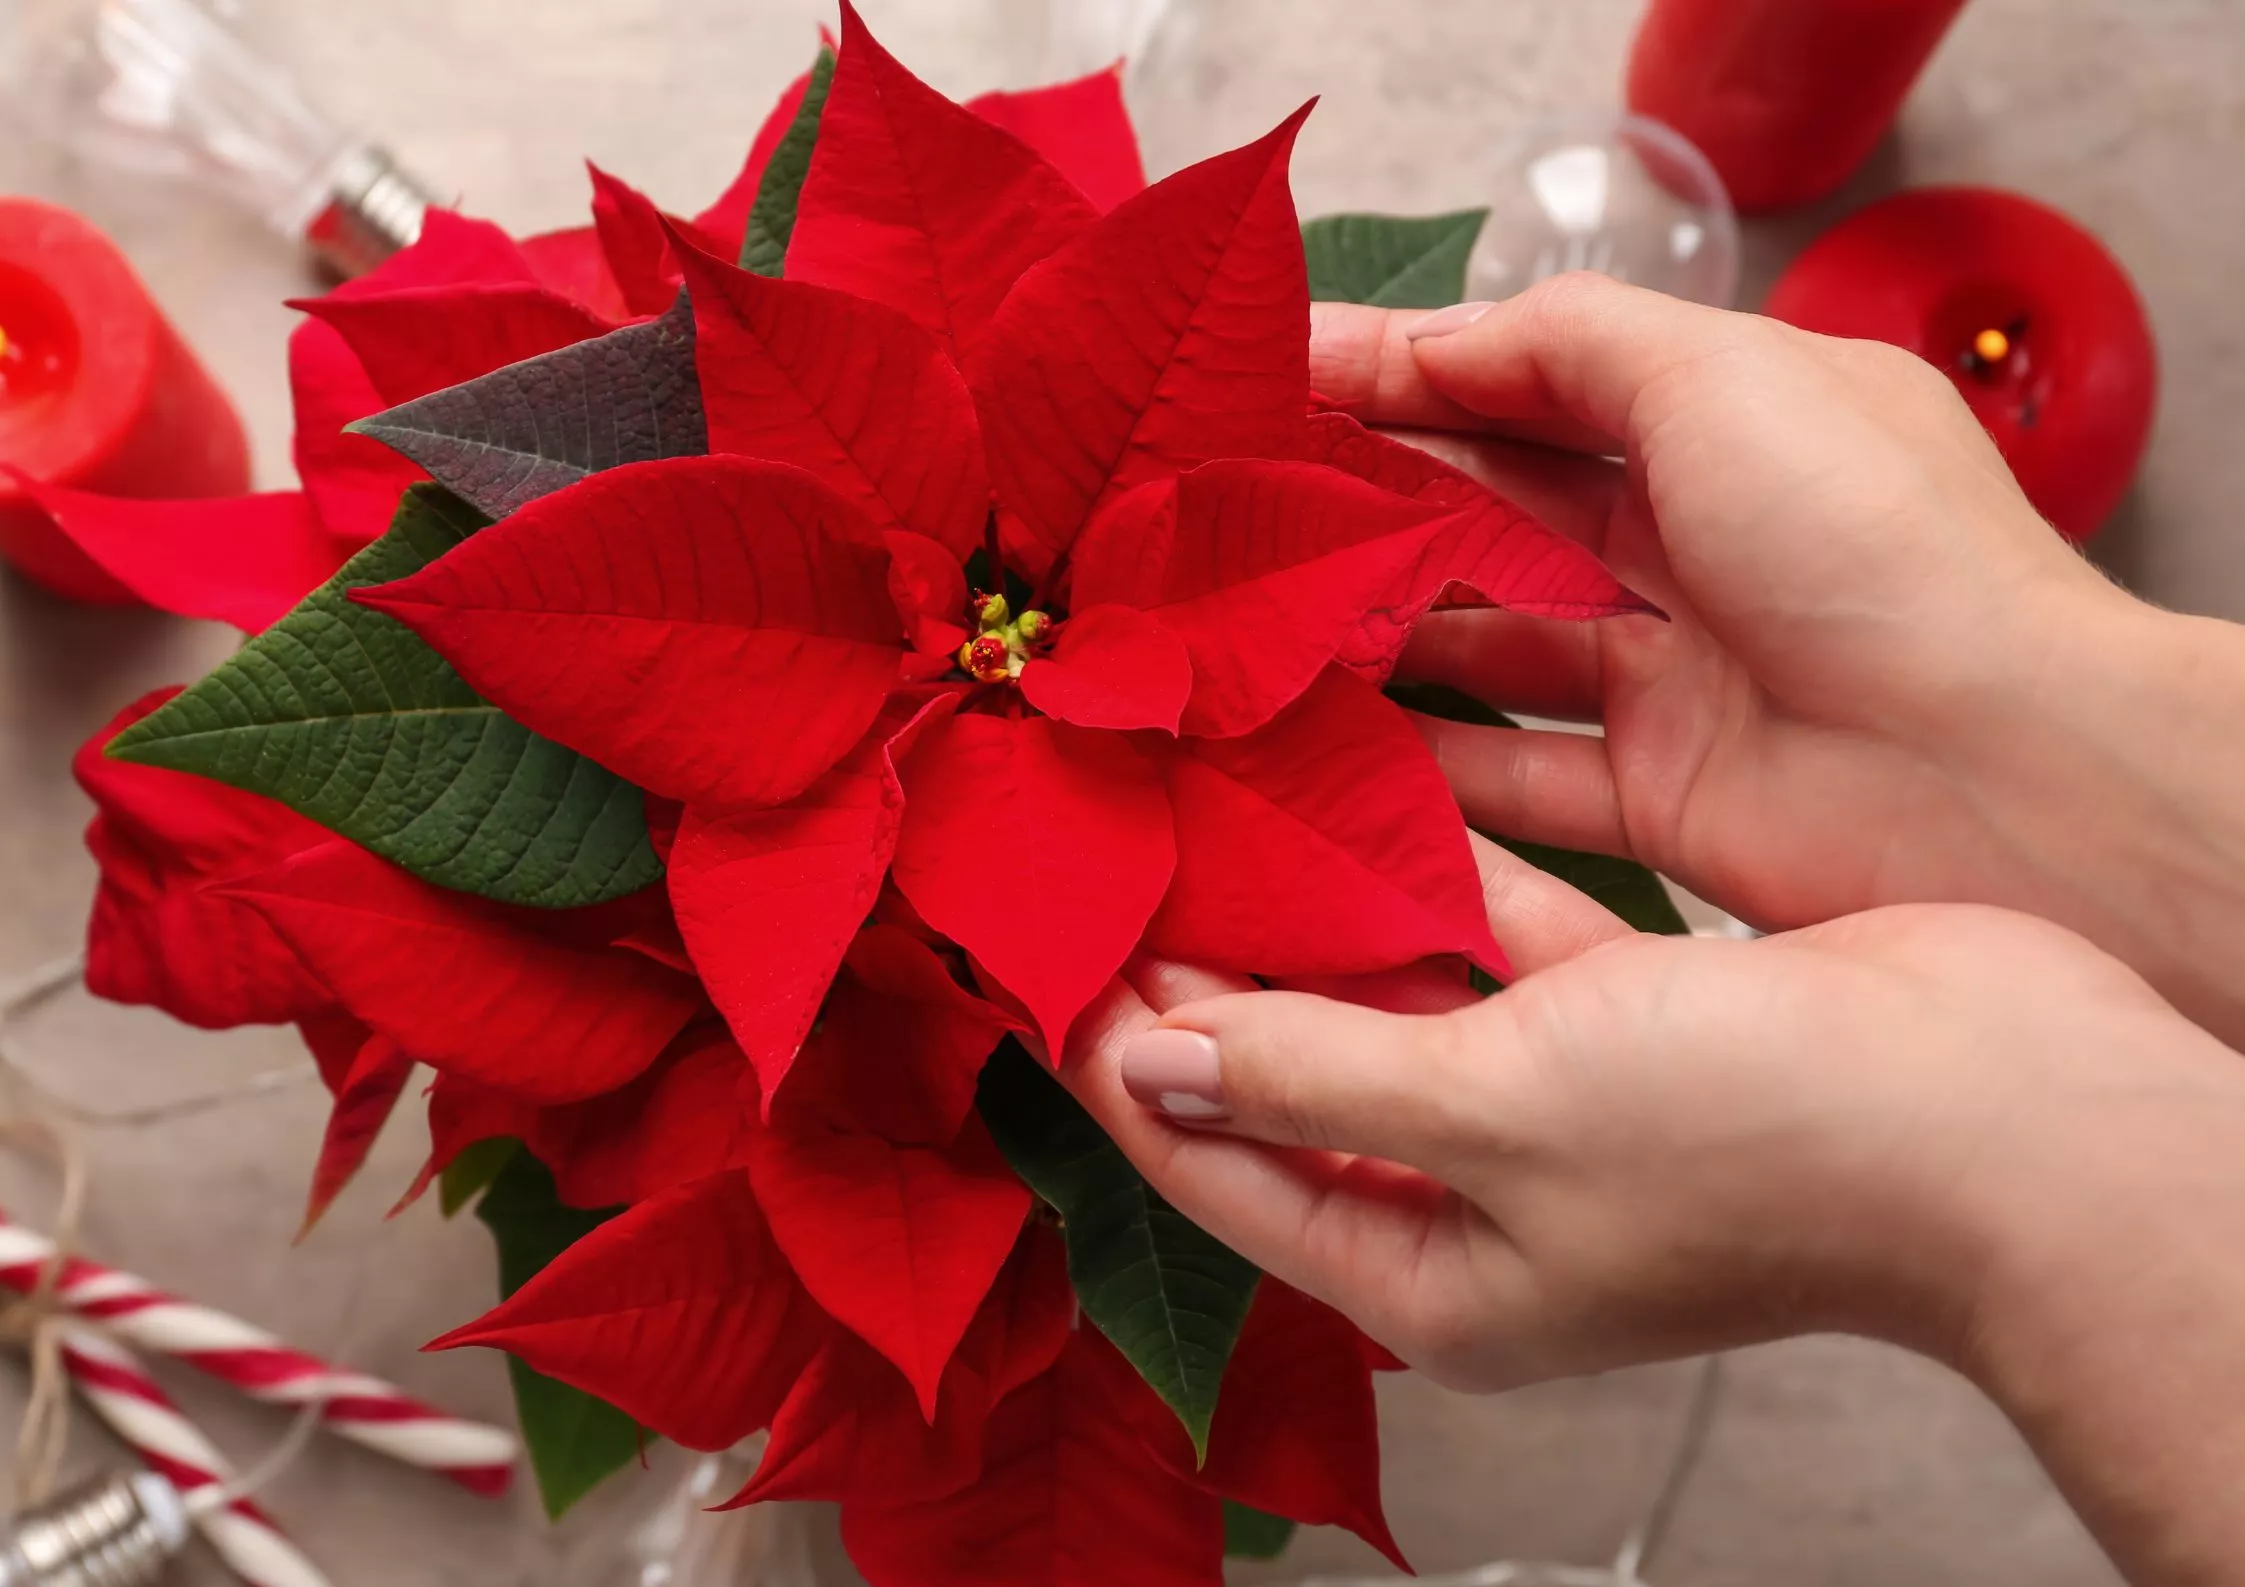 Spread Some Holiday Cheer With These Christmas Houseplants | ehow